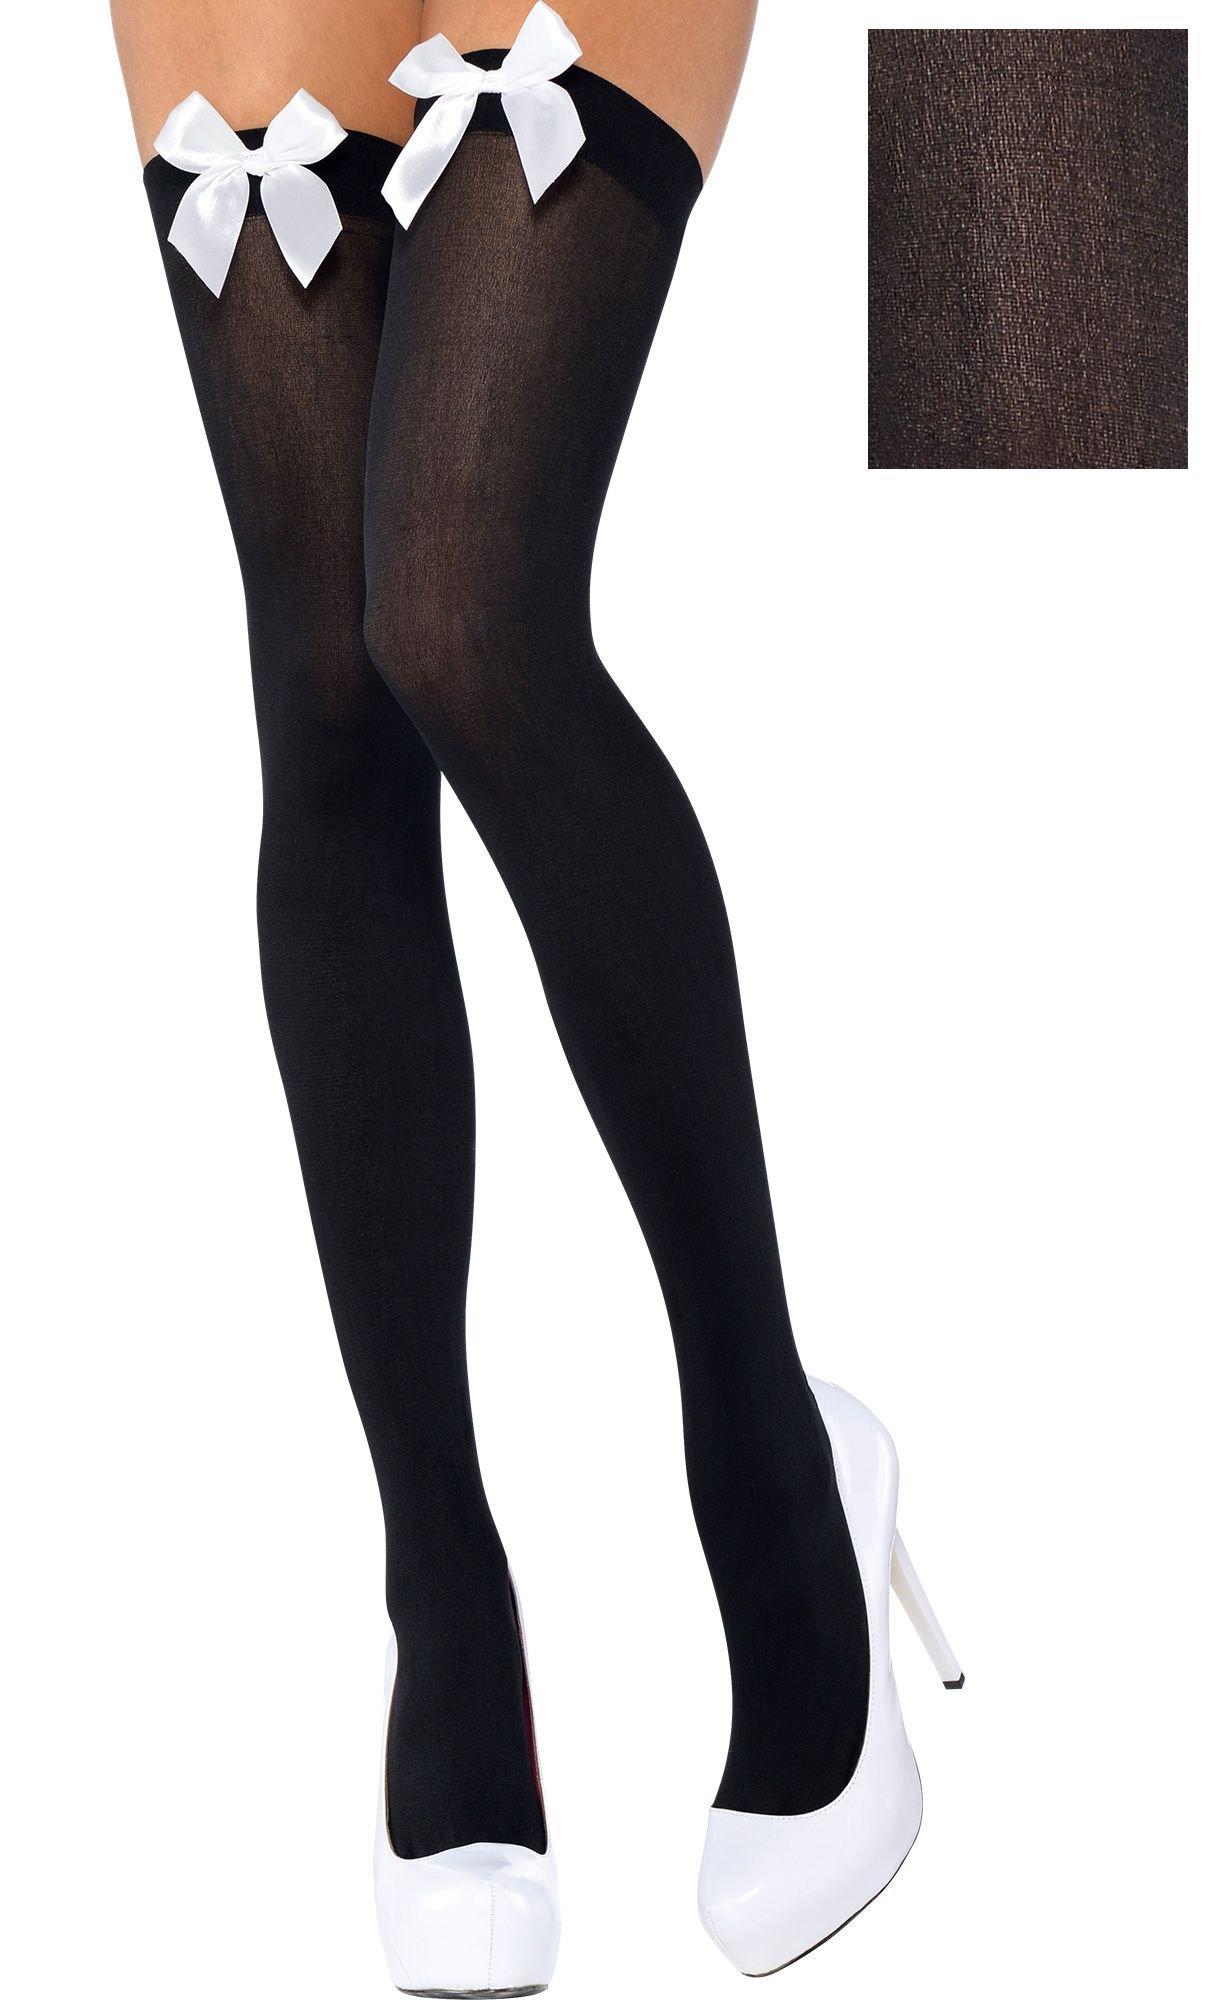 Bow Design Premium Tights – OWN YOUR ELEGANCE